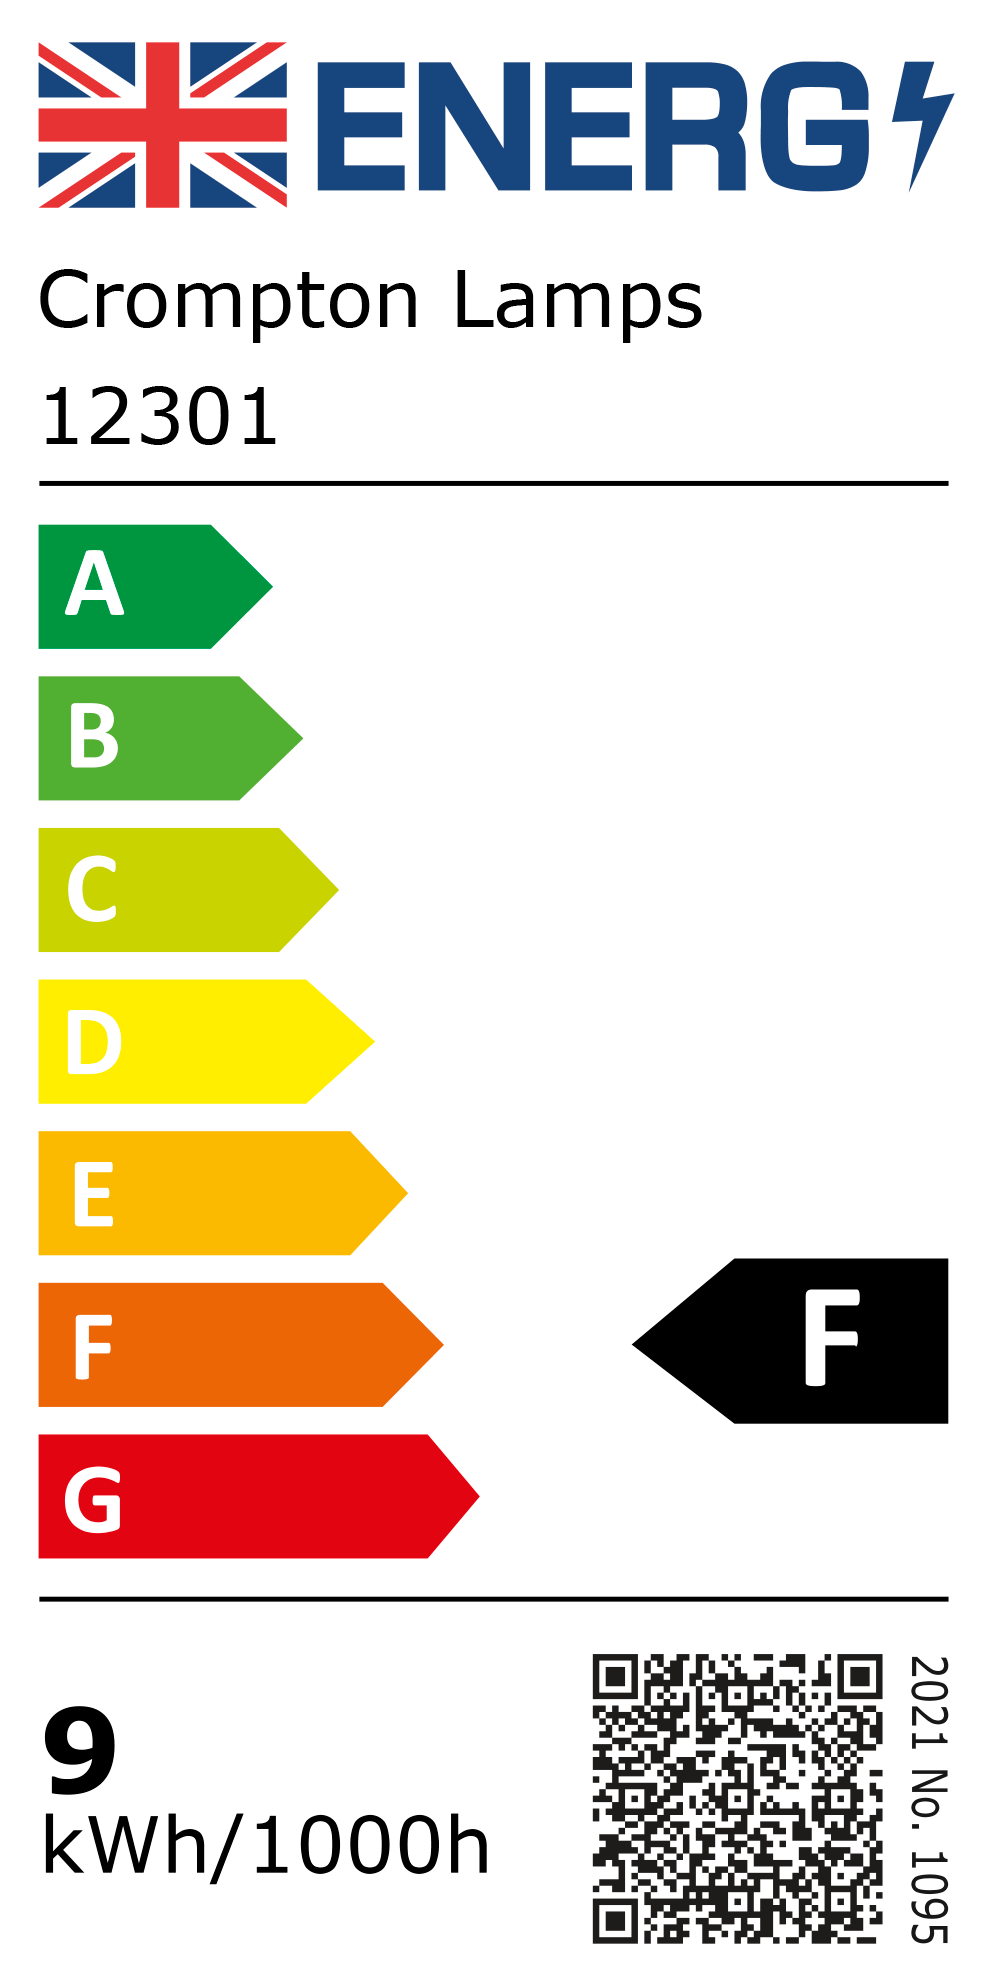 New 2021 Energy Rating Label: Stock Code 12301